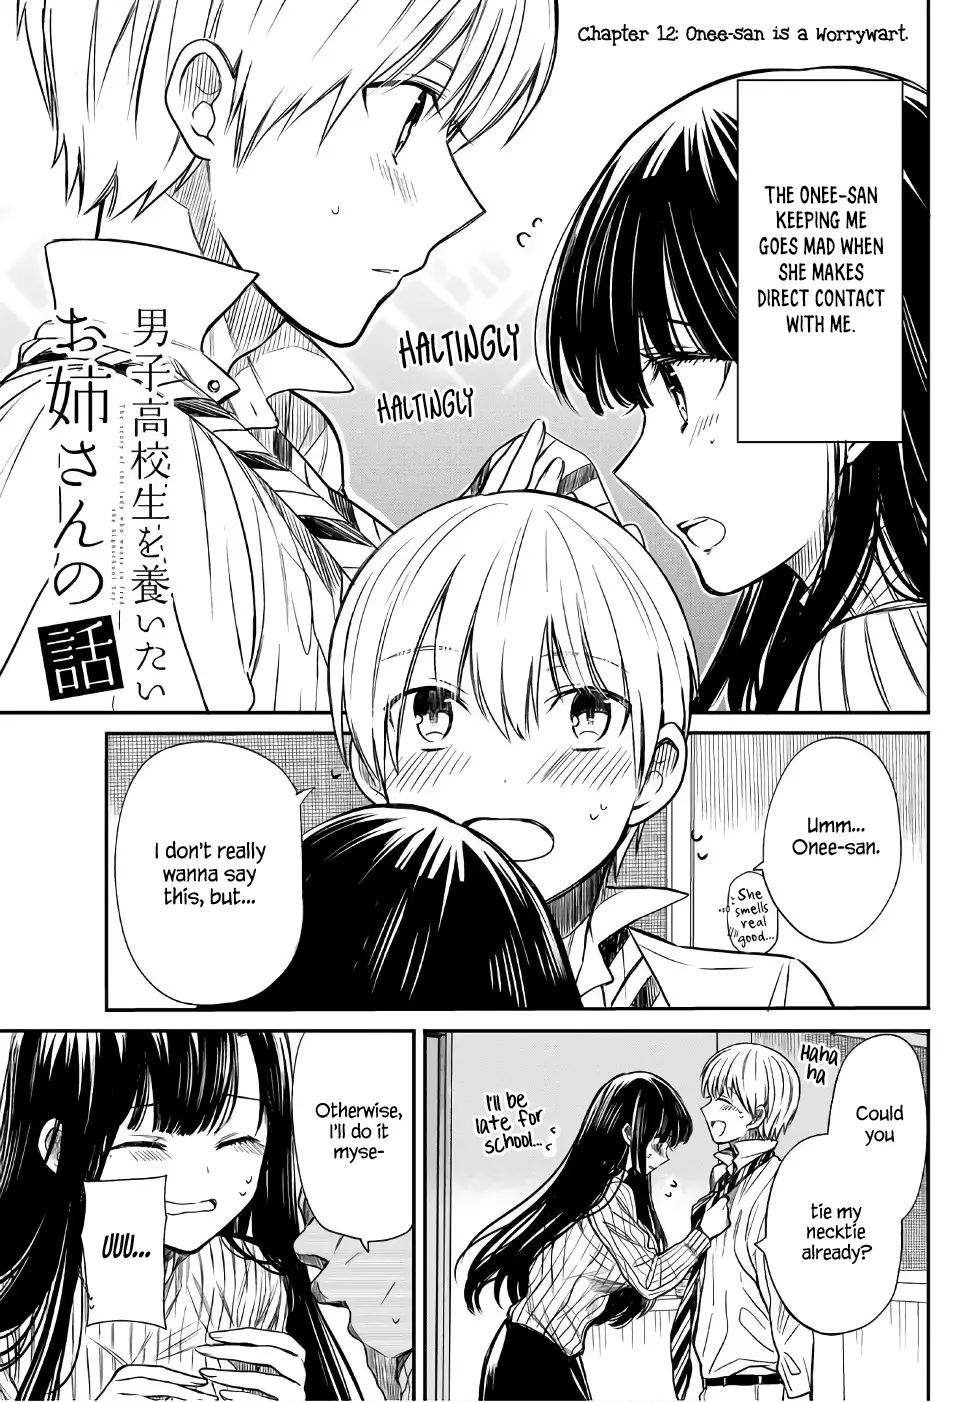 The Story Of An Onee-San Who Wants To Keep A High School Boy - 12 page 2